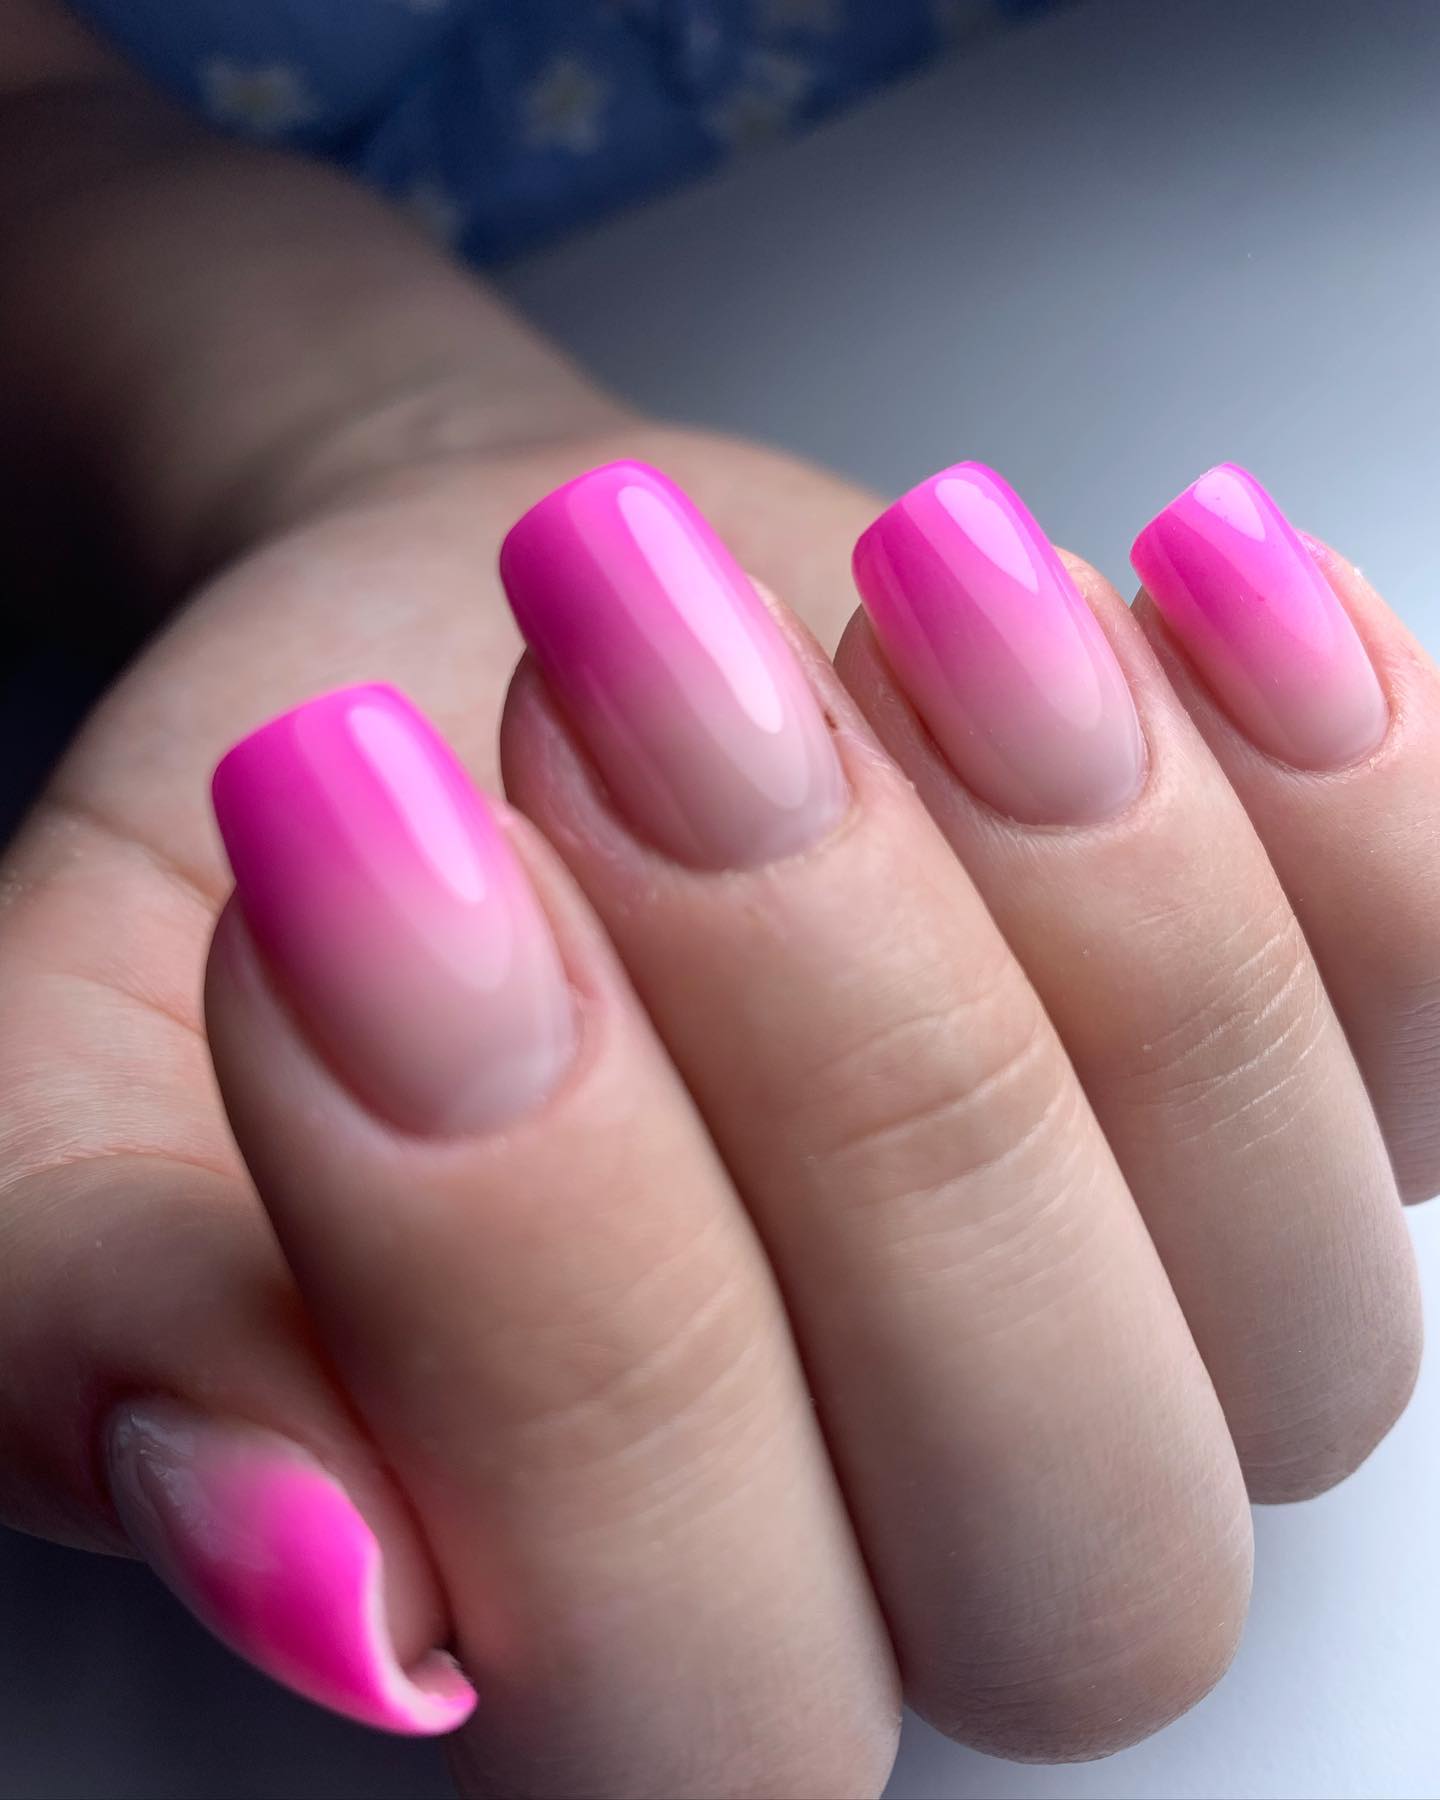 Do you trust your nail artist fully? Think that they can pull off this ombré manicure? If so, book them!